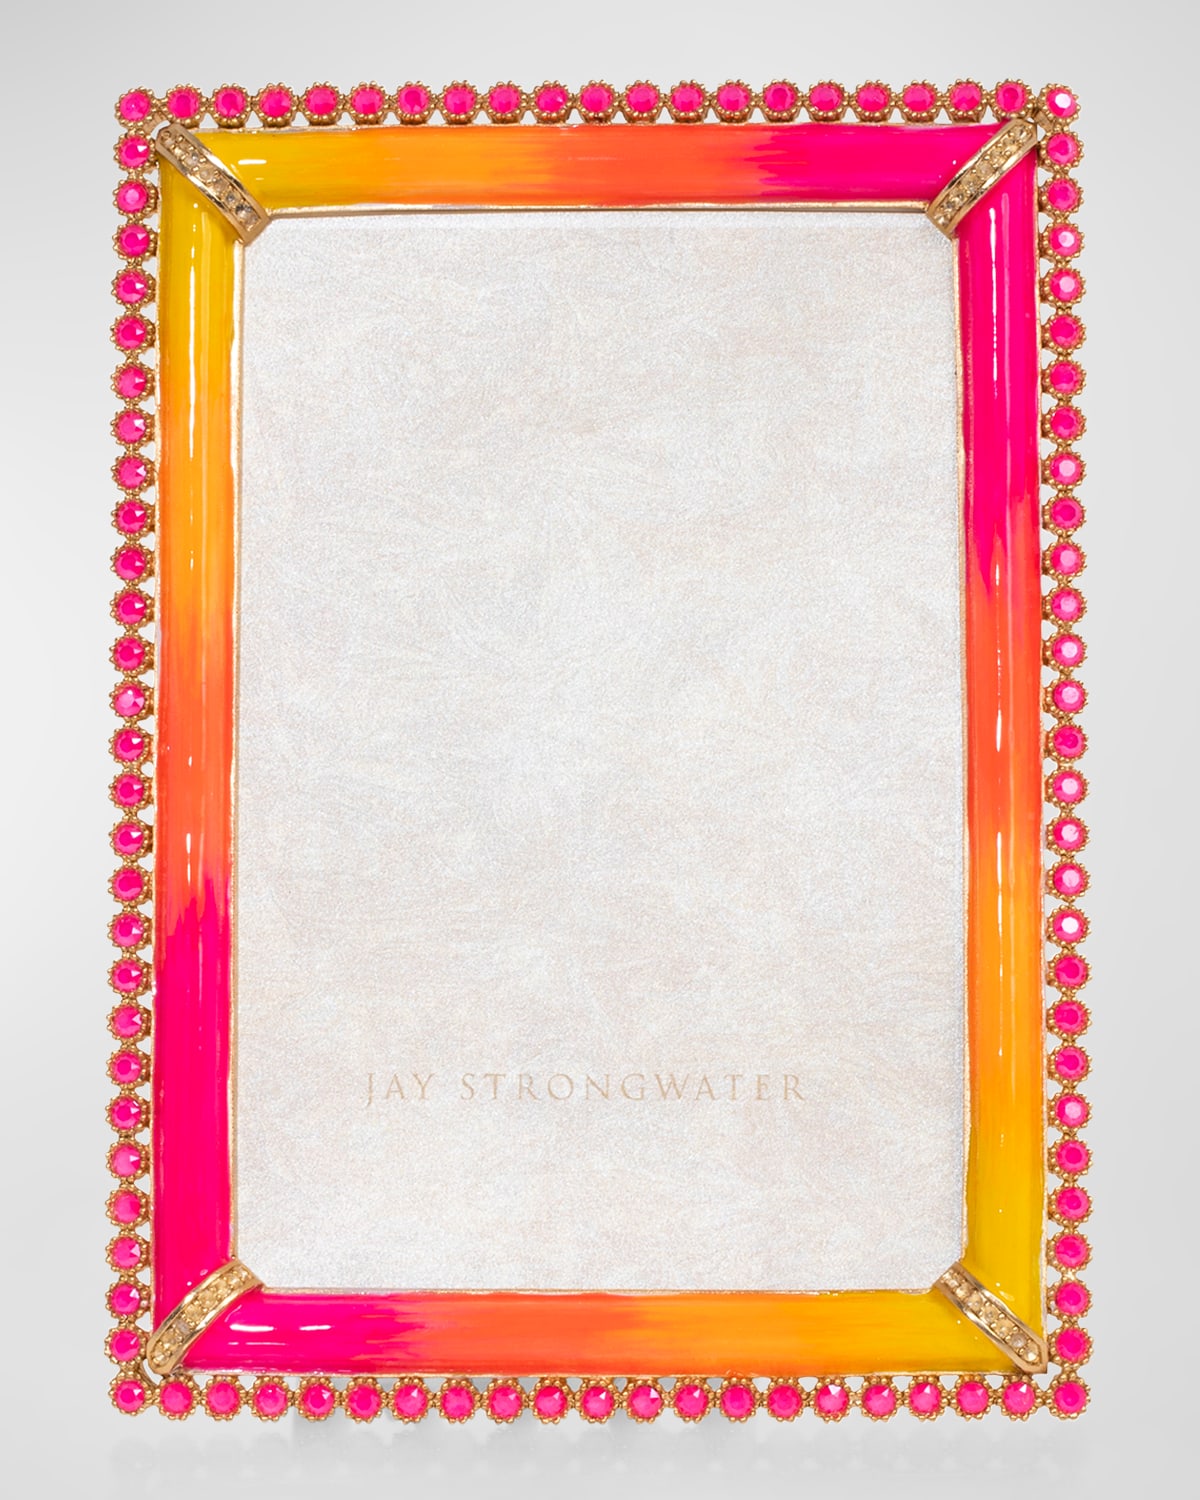 Jay Strongwater Lorraine Stone Edge 4 X 6 Frame In Electric Pink